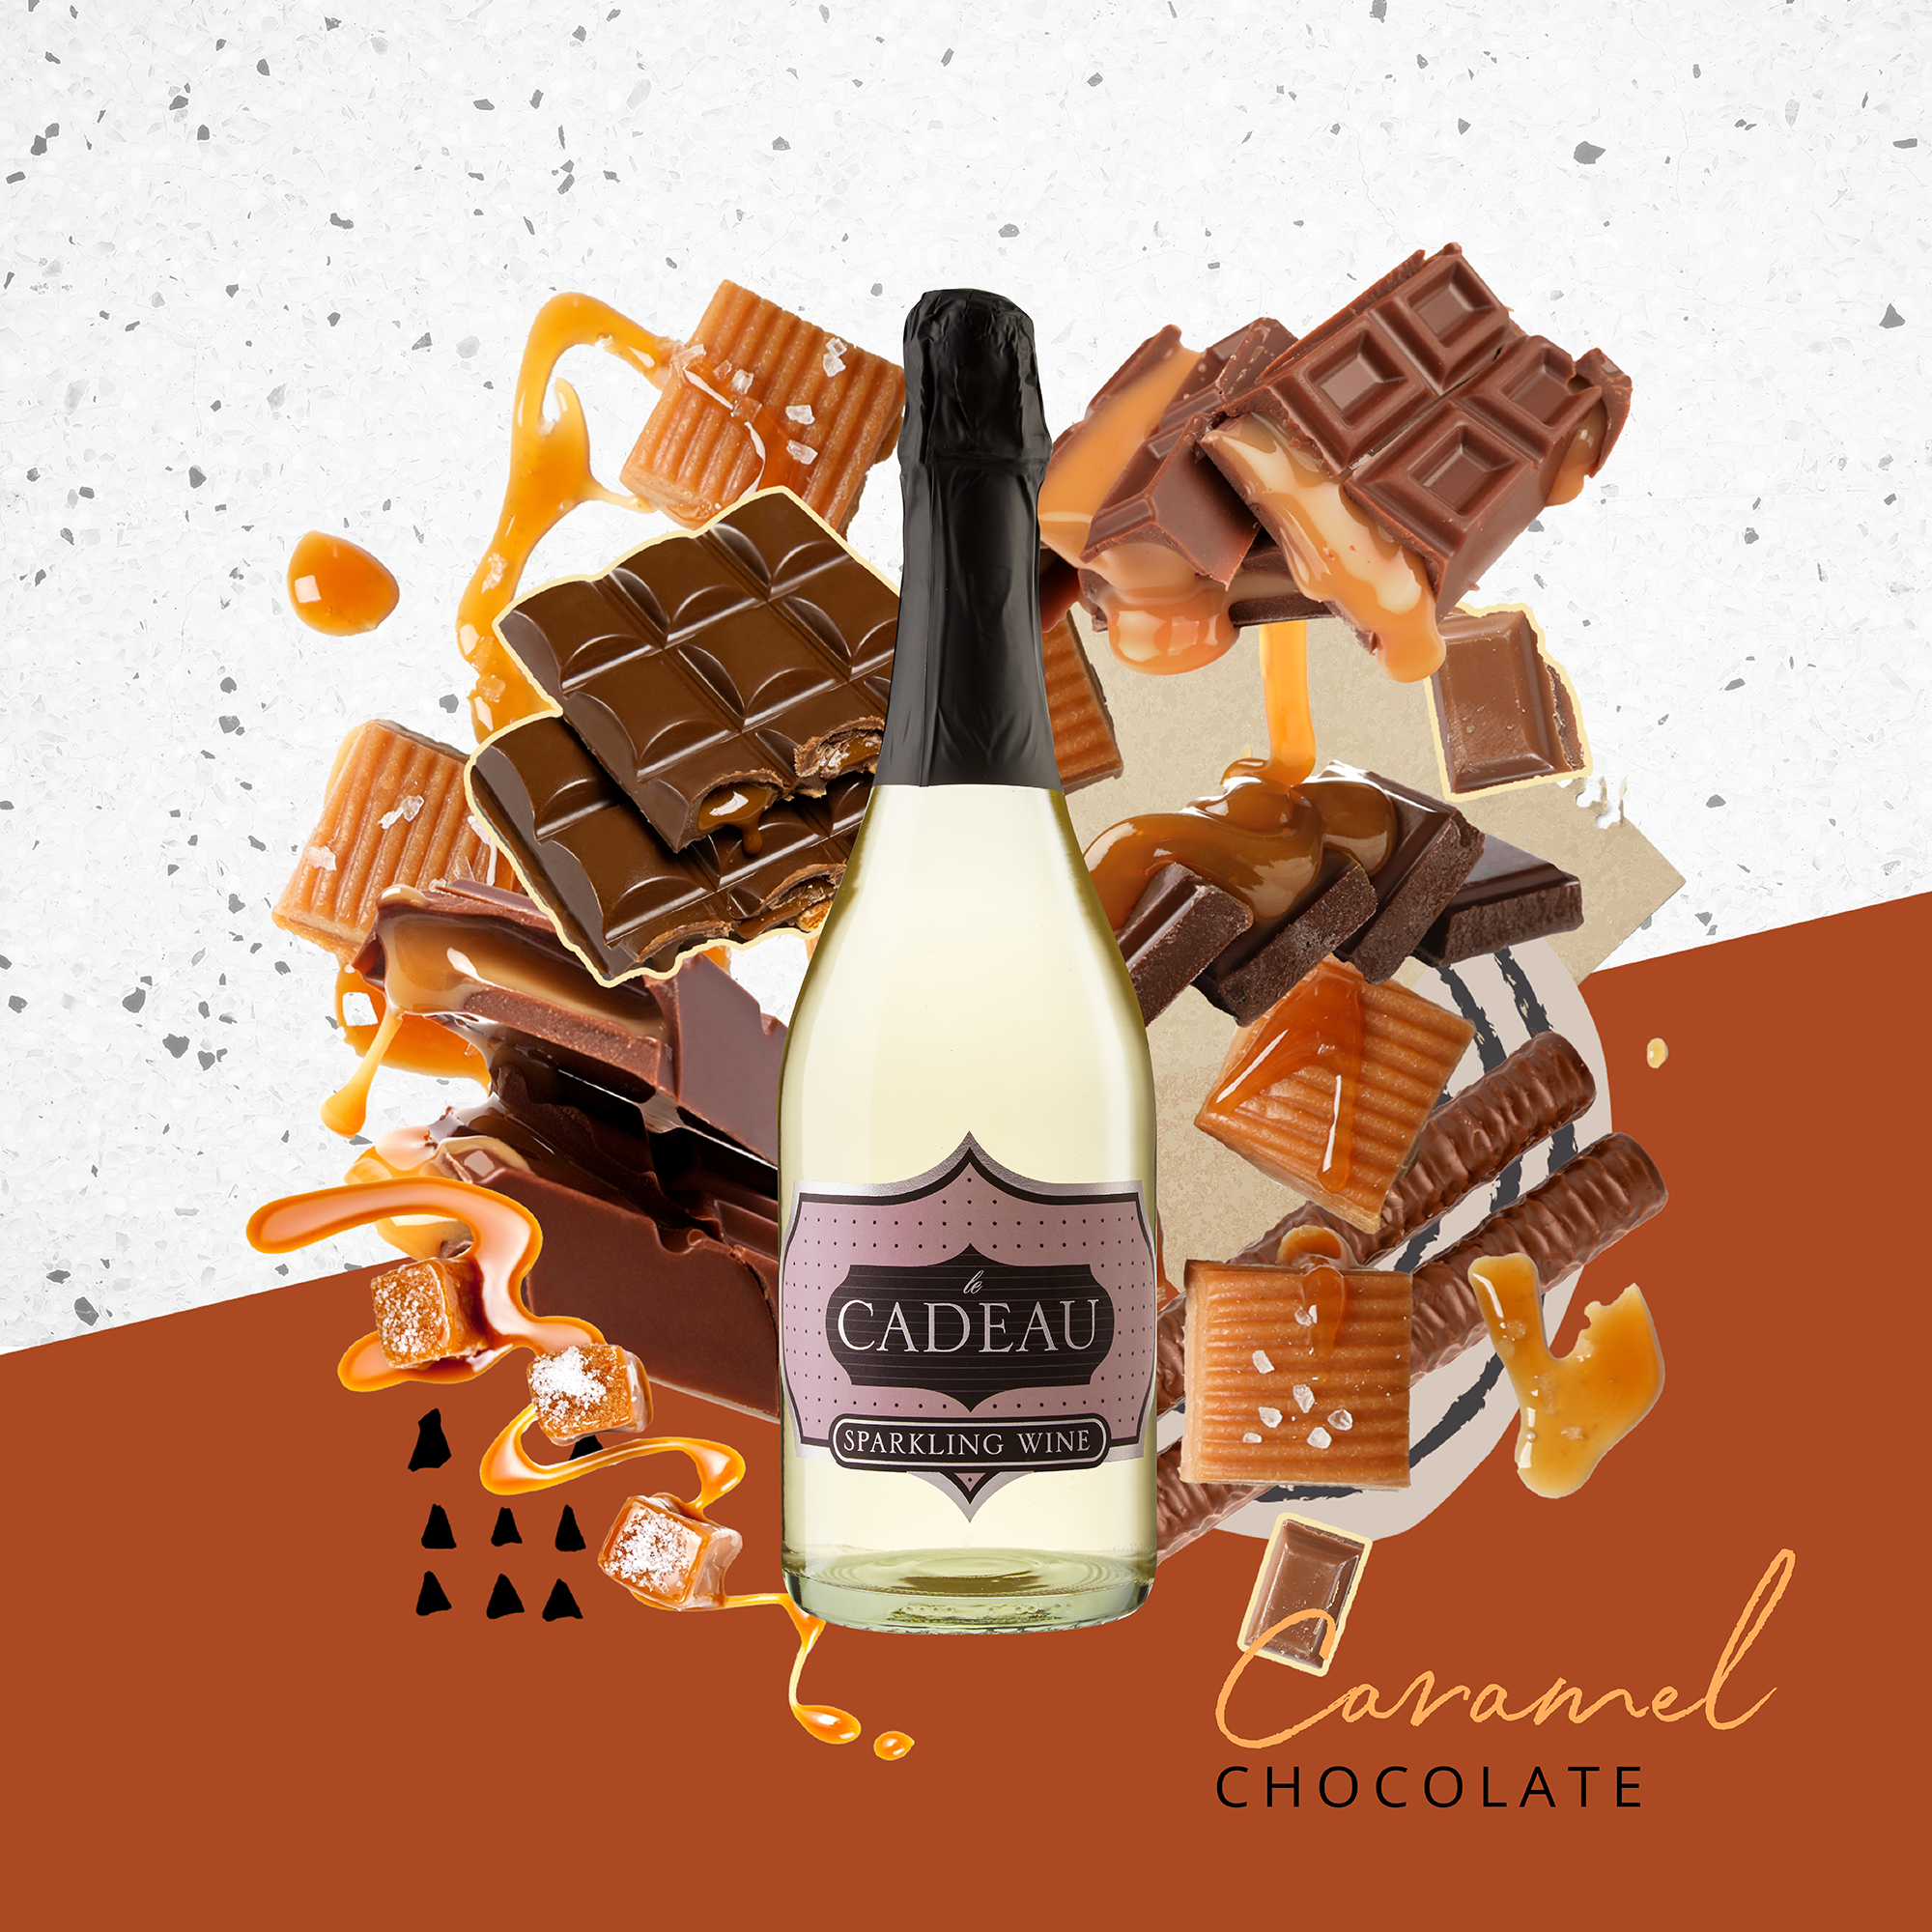 Caramel chocolate and wine collage